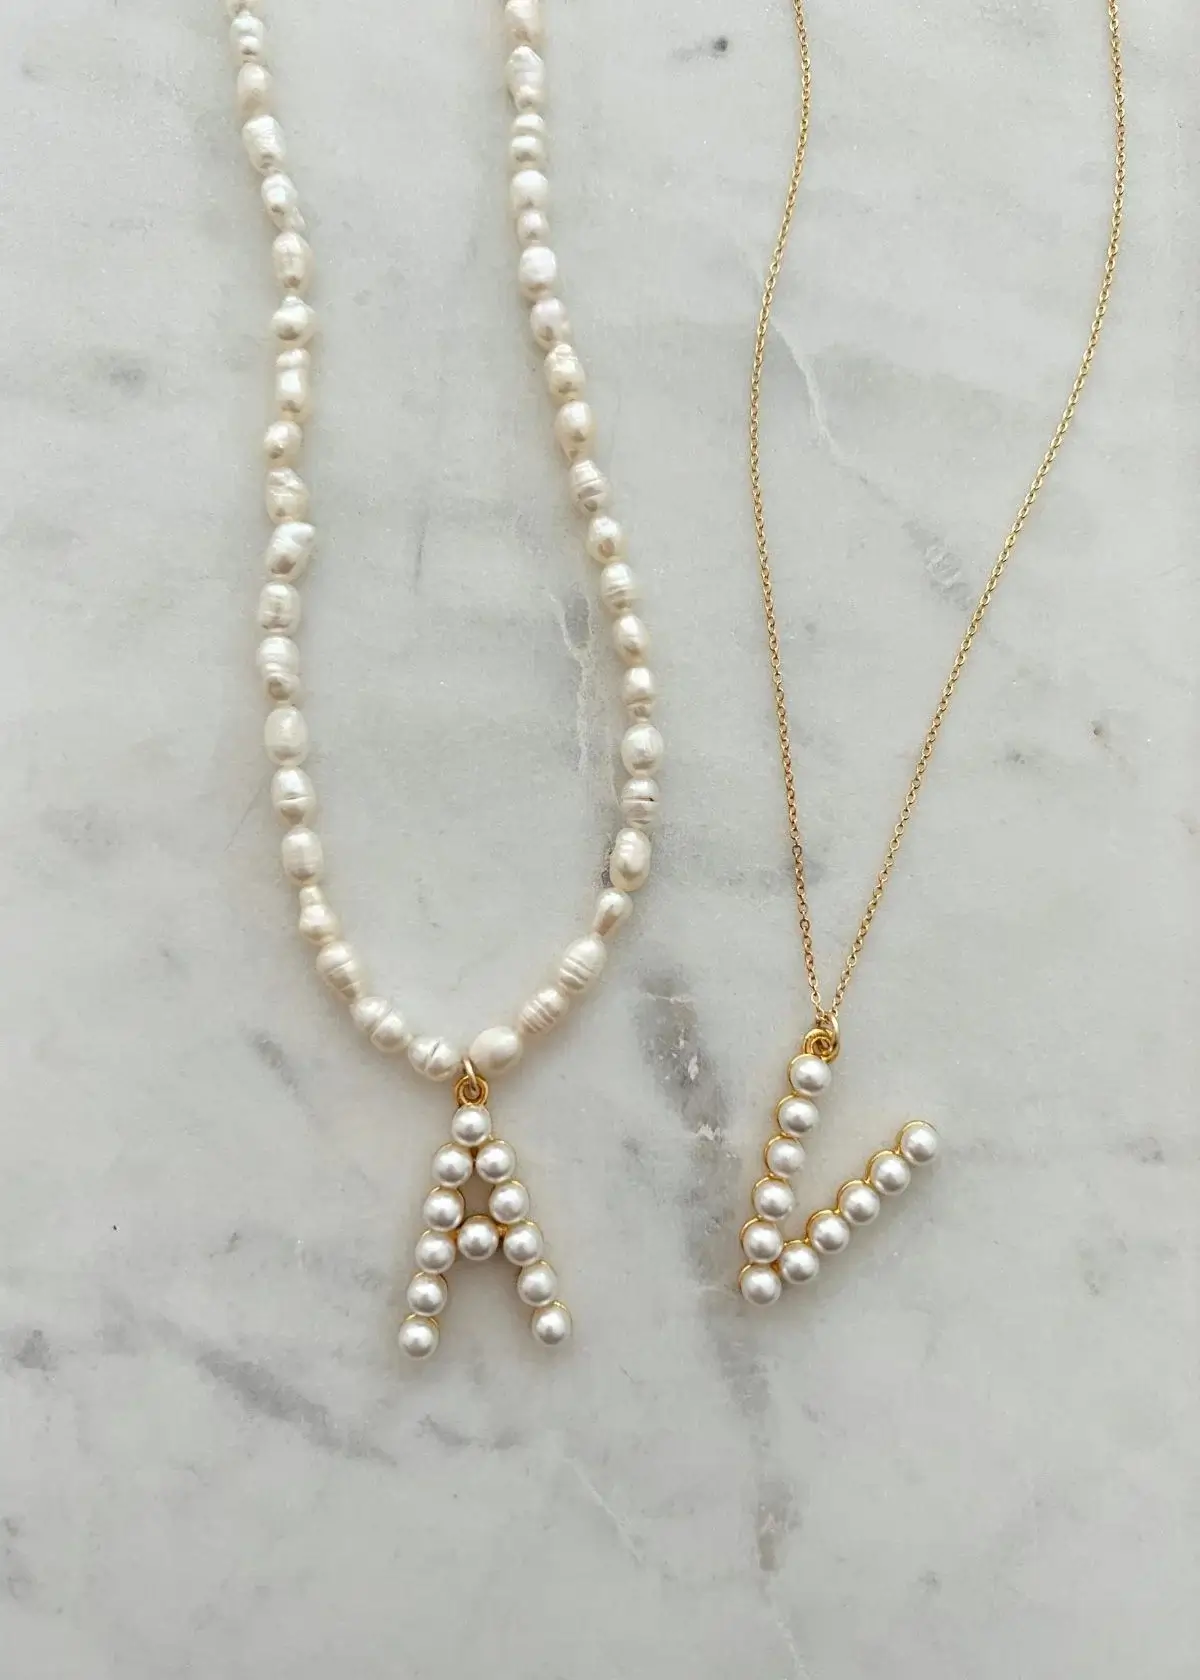 What materials are commonly used in pearl initial necklaces?